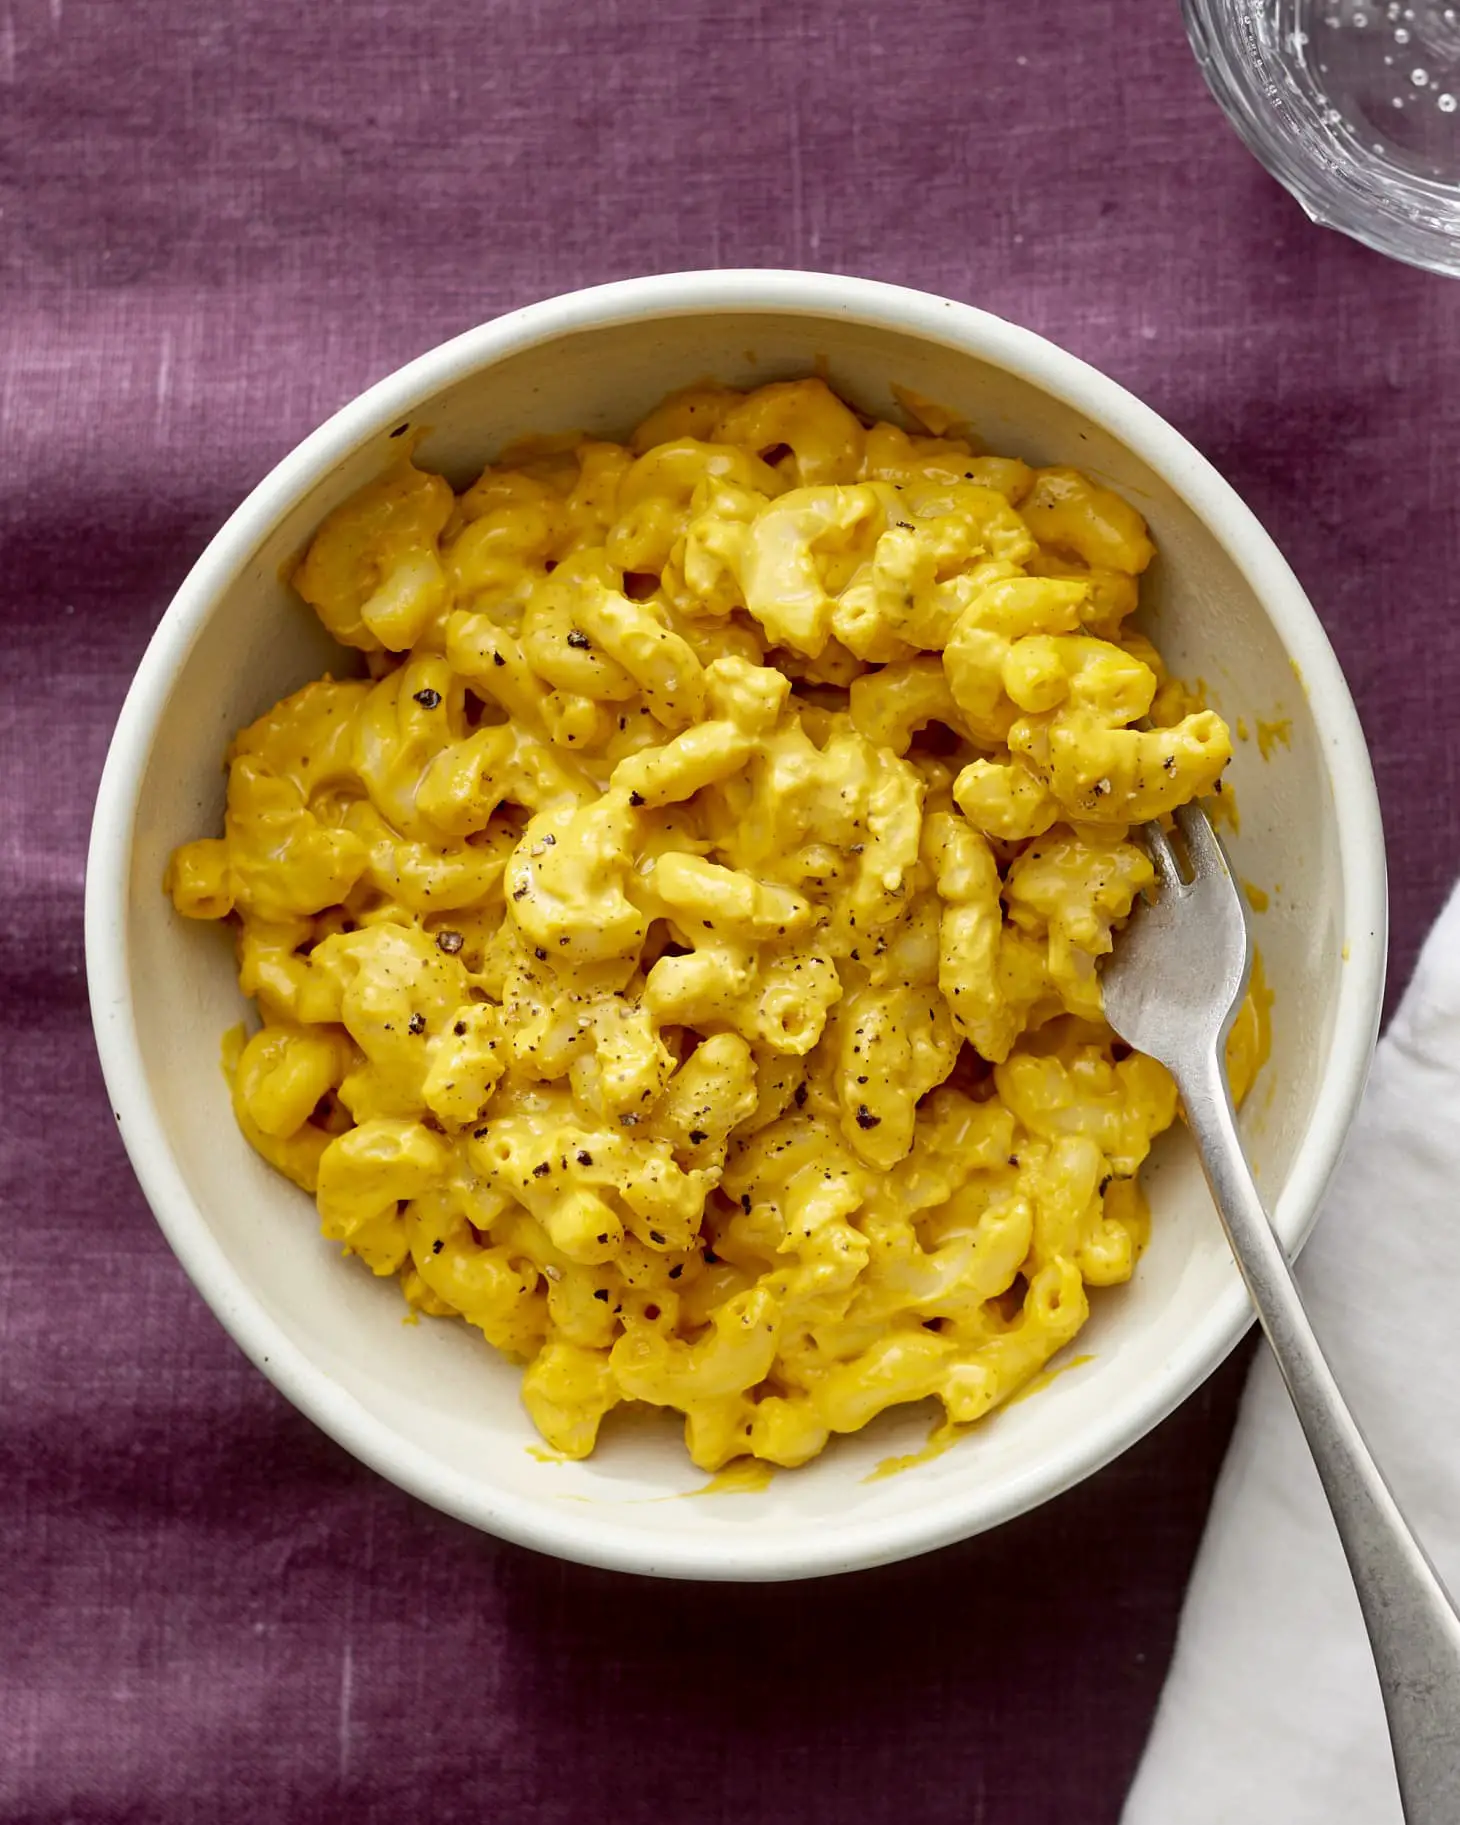 How To Make the Ultimate Vegan Mac and Cheese